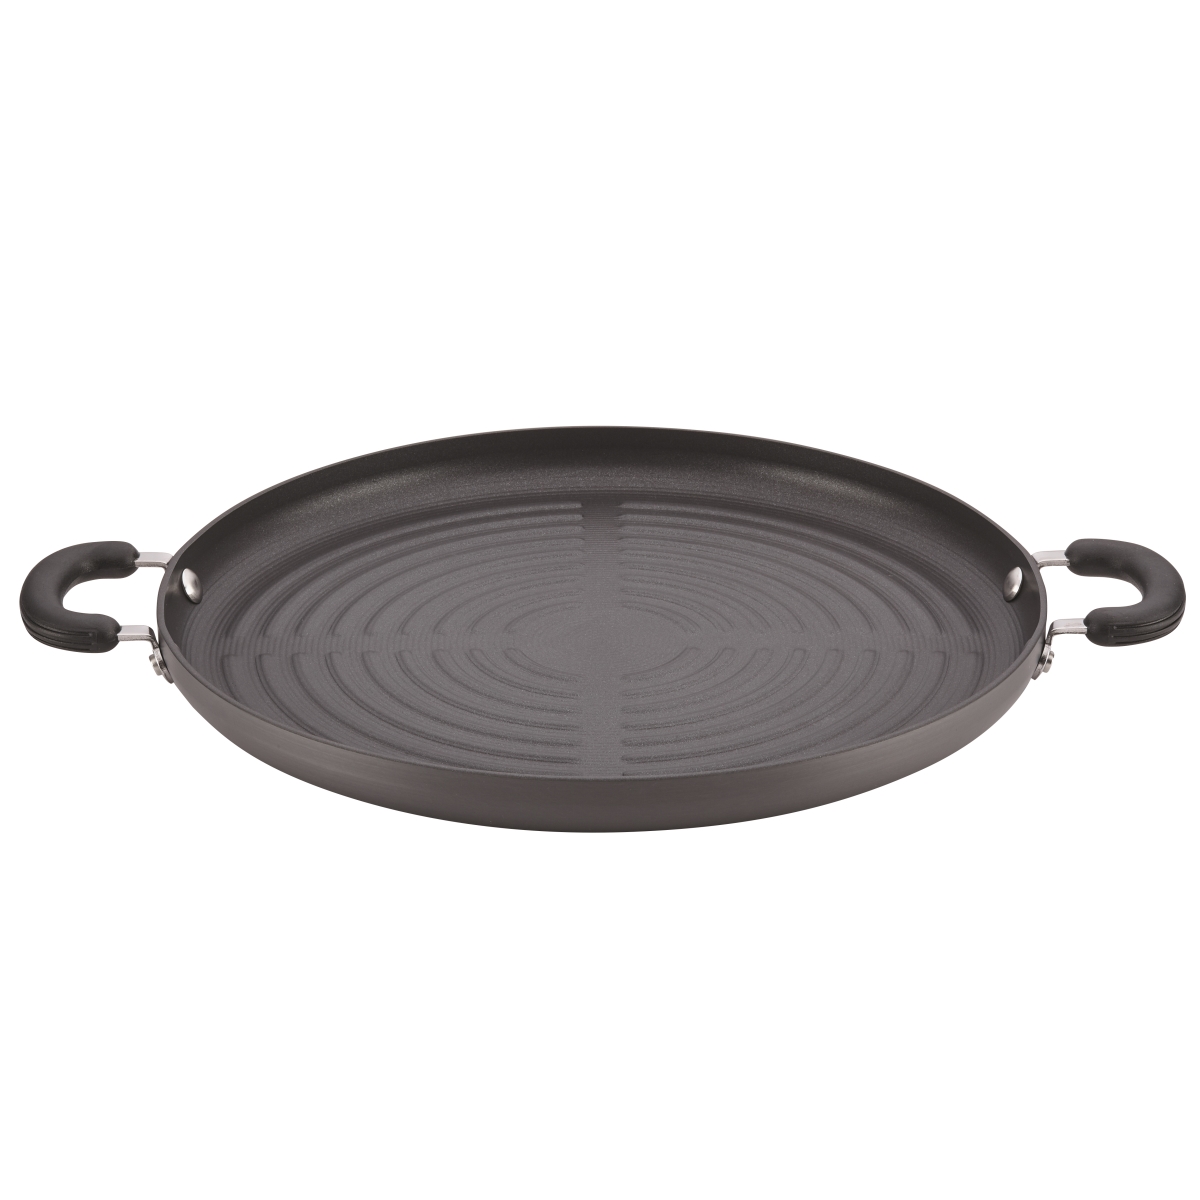 83851 14 In. Classic Hard Anodized Nonstick Jumbo Grill Pan, Gray